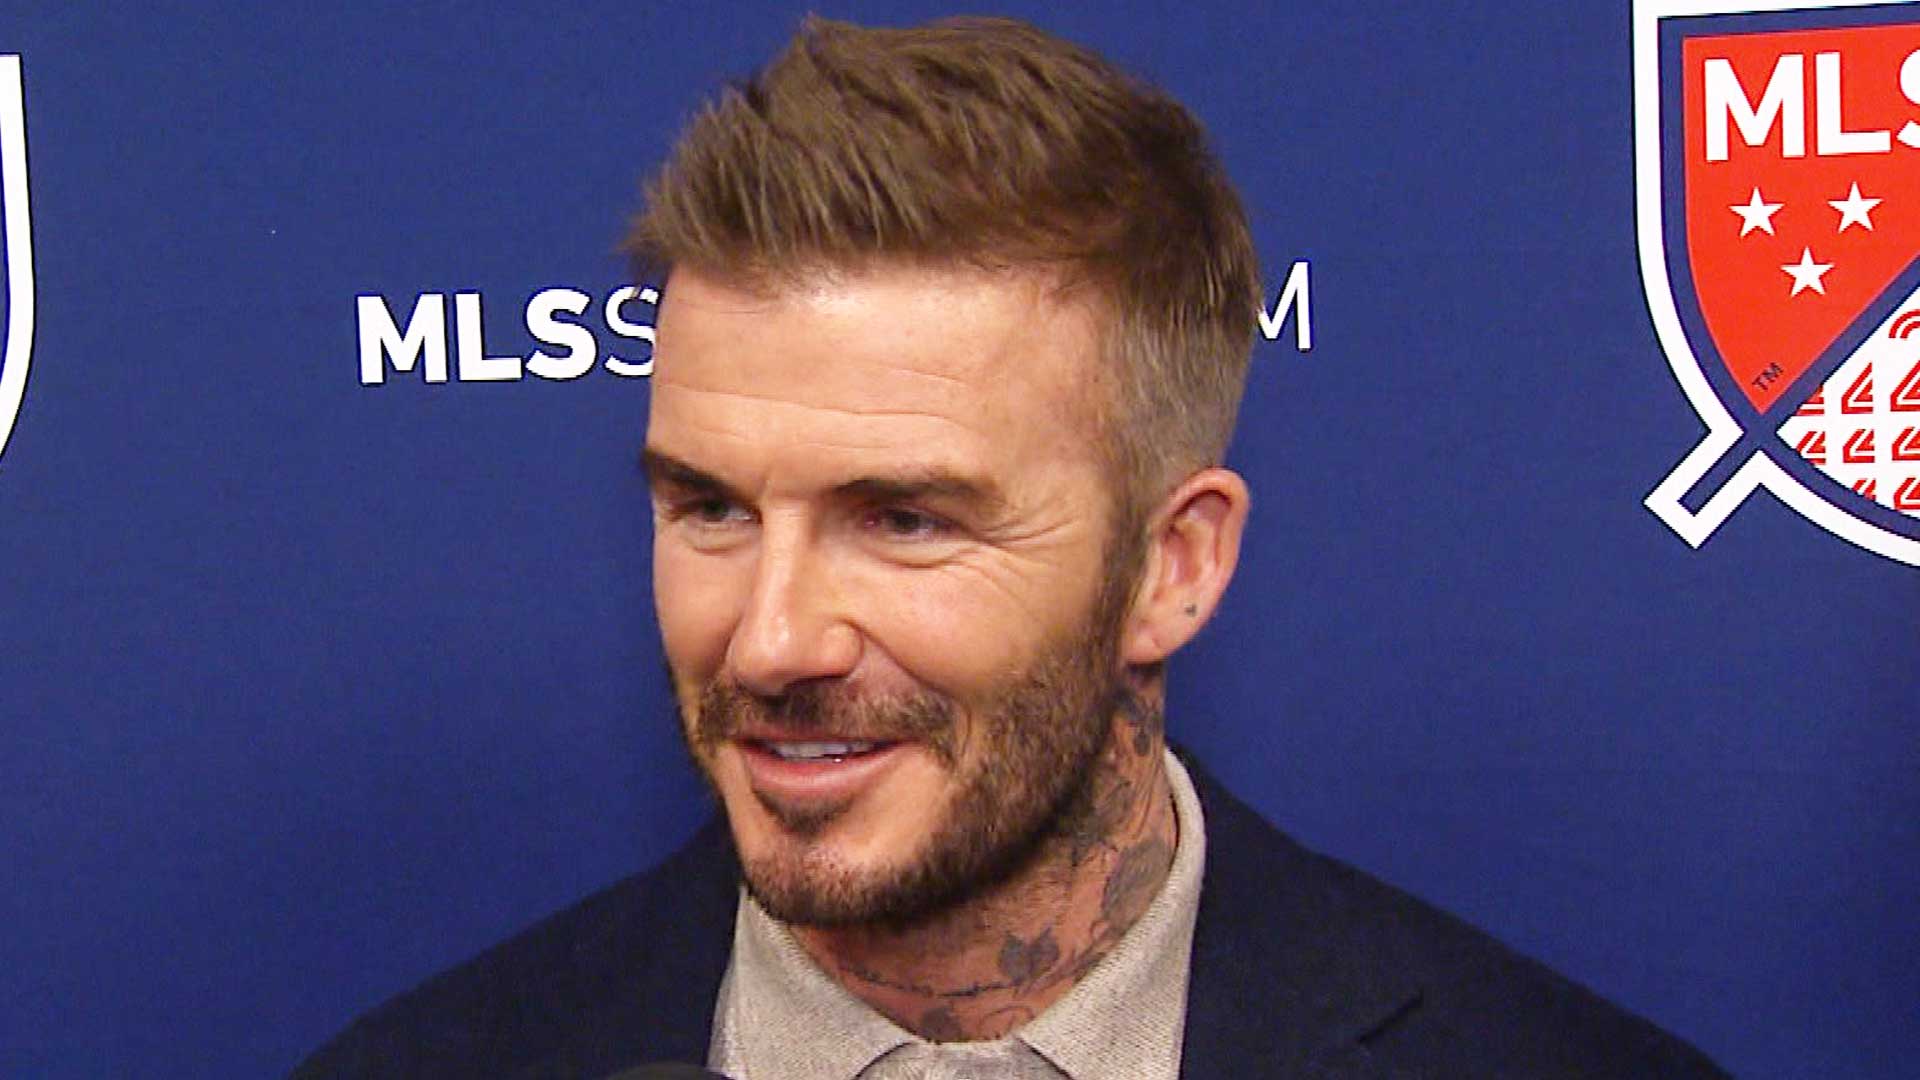 David Beckham Gallery - New Hair - New Look ✂️👱‍♂️ DAD DID IT FIRST 👨🏼  in the 90s #Repost David Beckham . . . Sometimes the boys need reminding  who did it